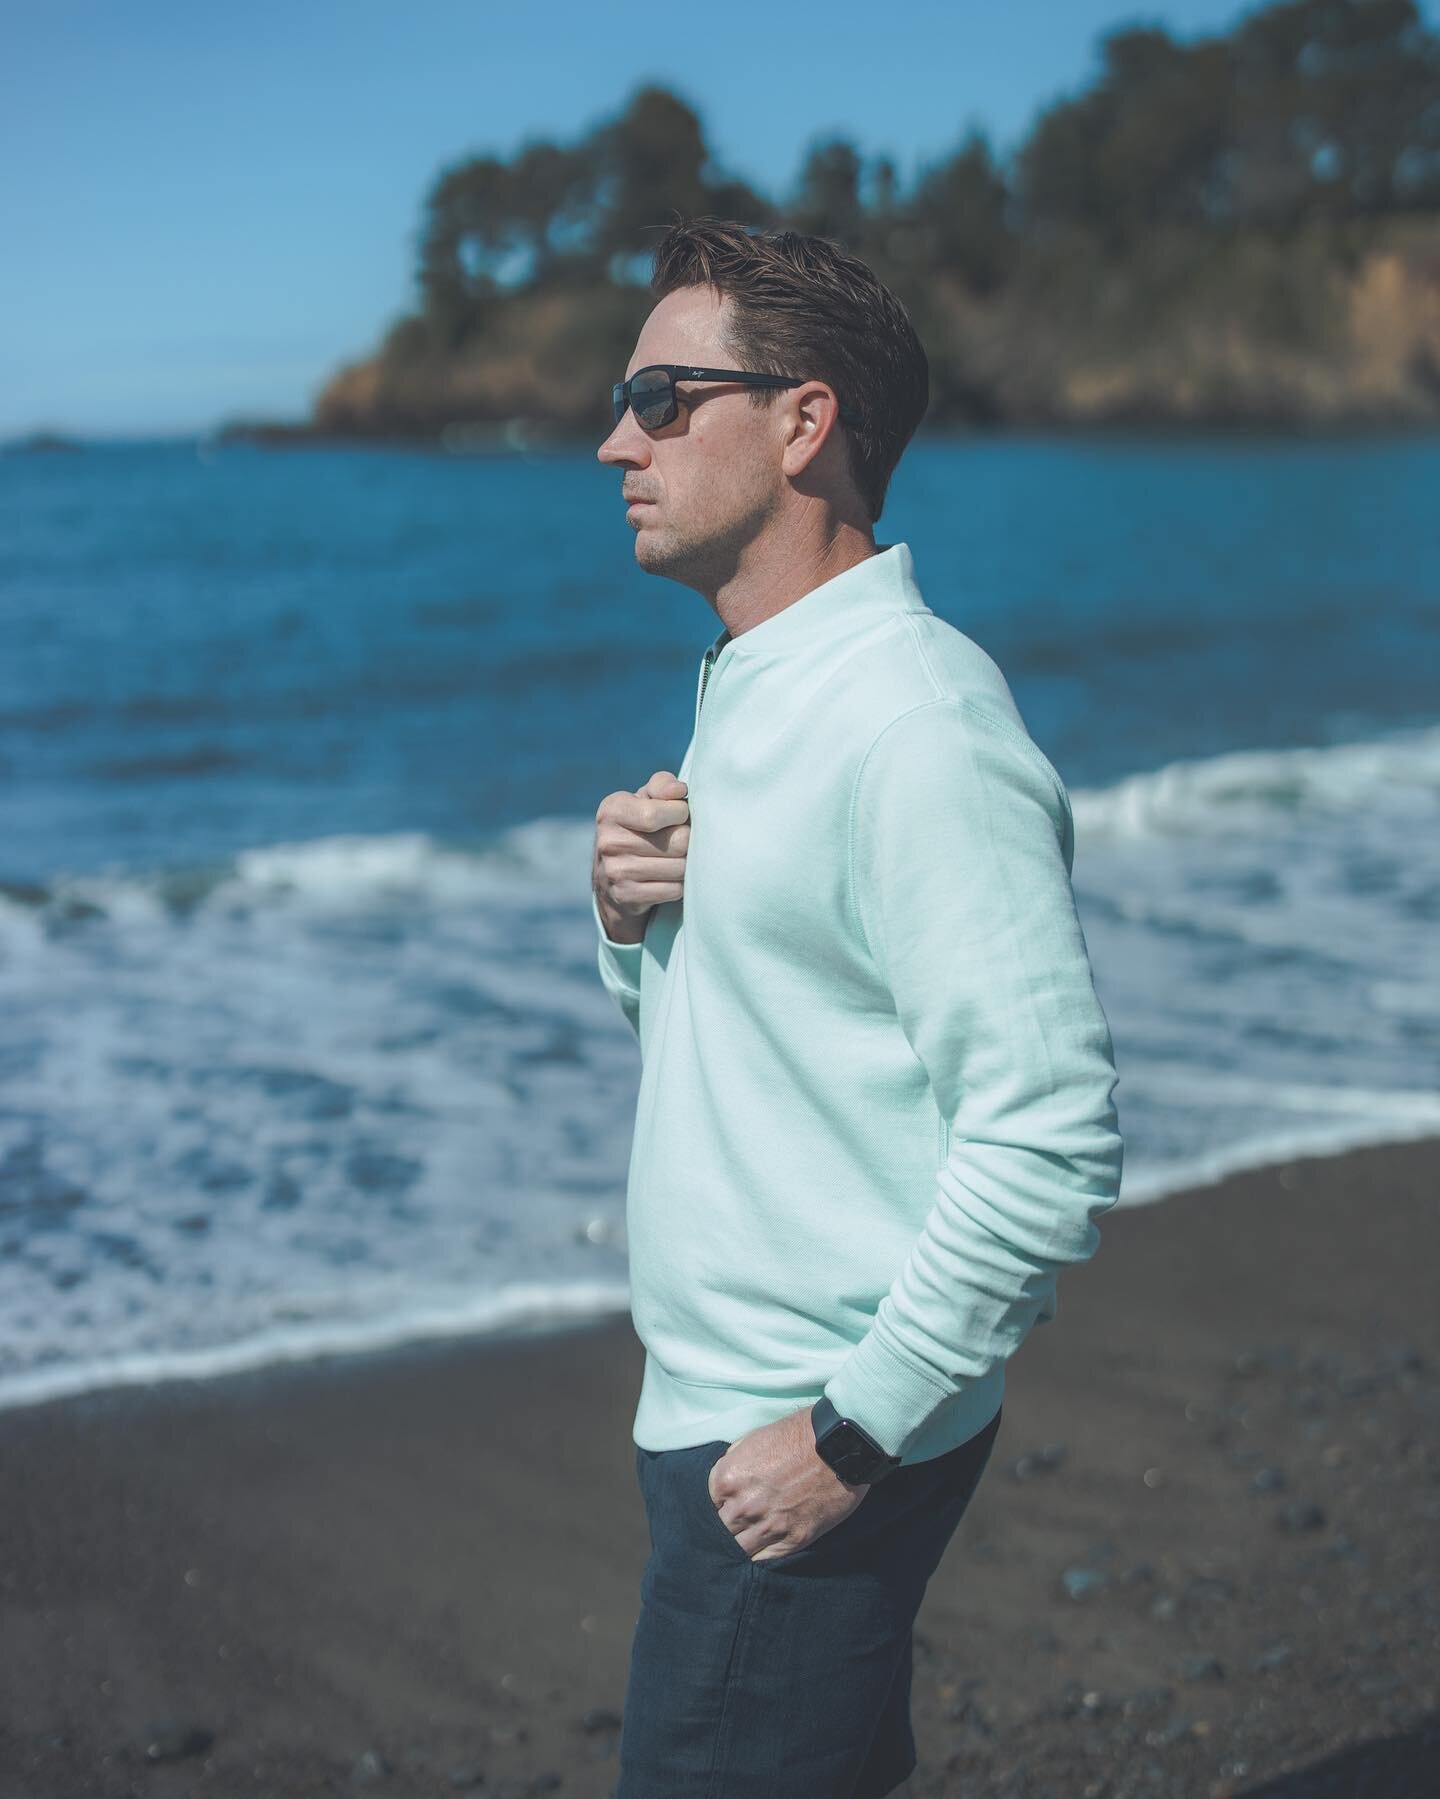 Strolling along the backshore, @stephenchollet dons attire perfect for both high and low tide. The dreamy colors and utter comfort of these pieces from @billy_reid make them ideal replacements for the typical jeans-and-tee ensemble while vacationing 